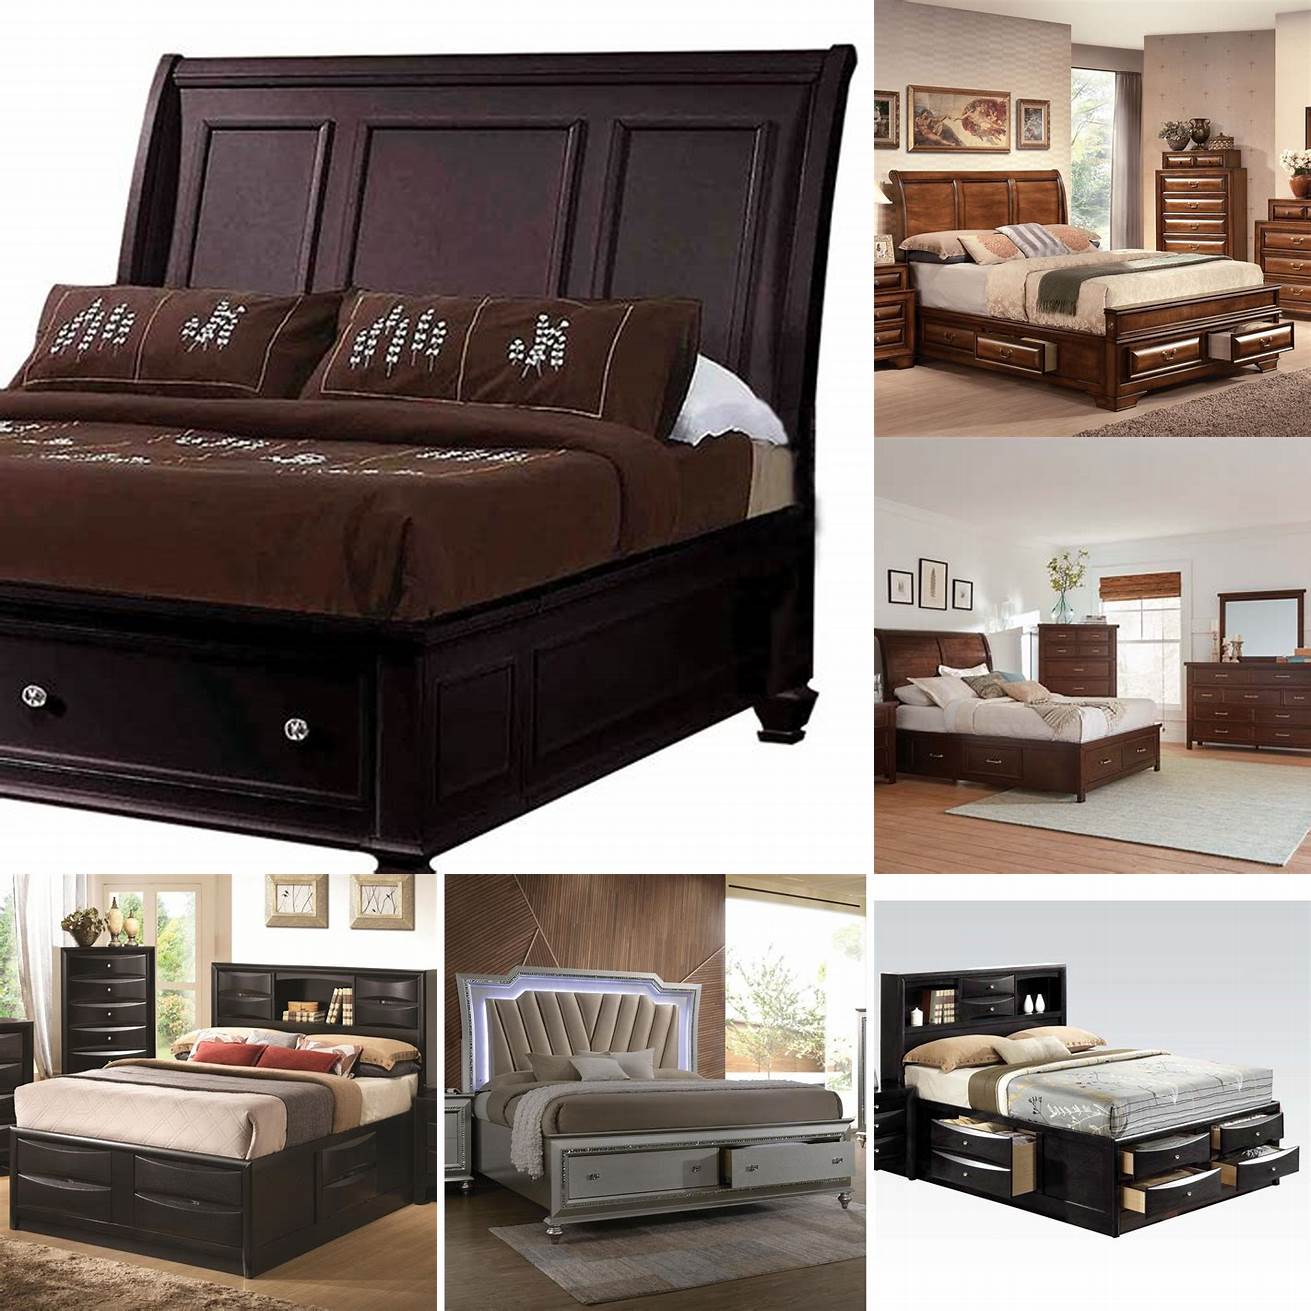 A practical Storage Eastern King Bed with built-in drawers